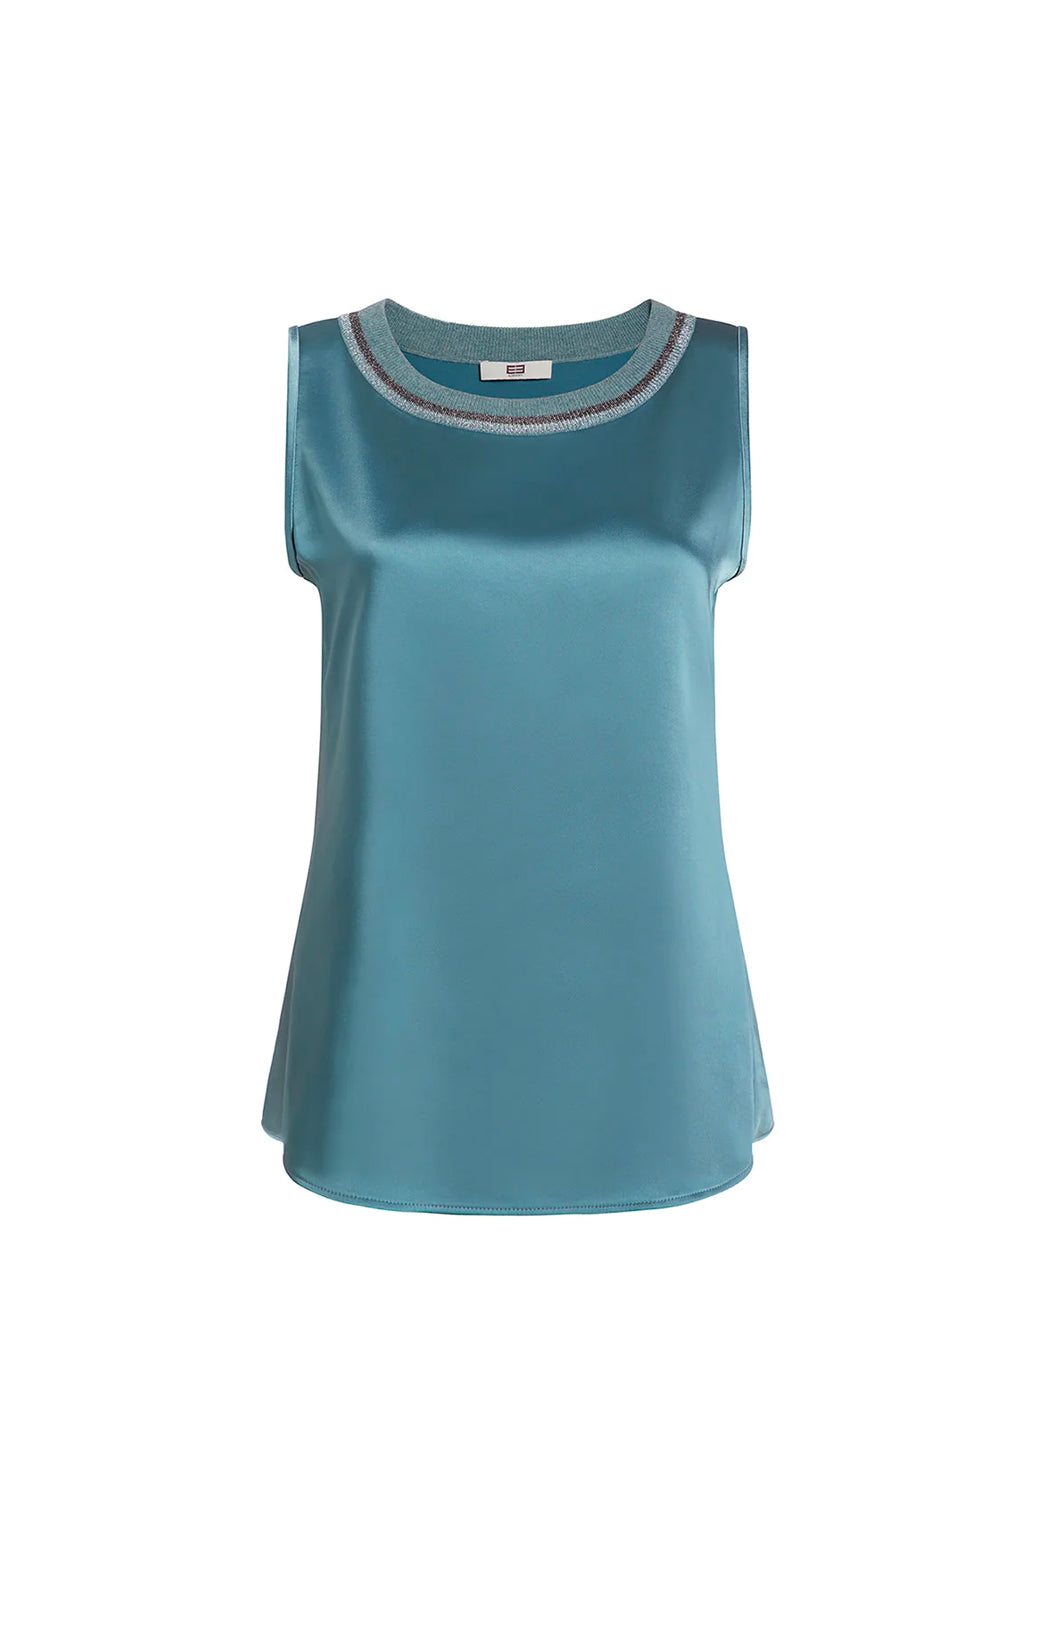 Converge-Gry - Cashmere-Softened Cami Sweater - Product Image